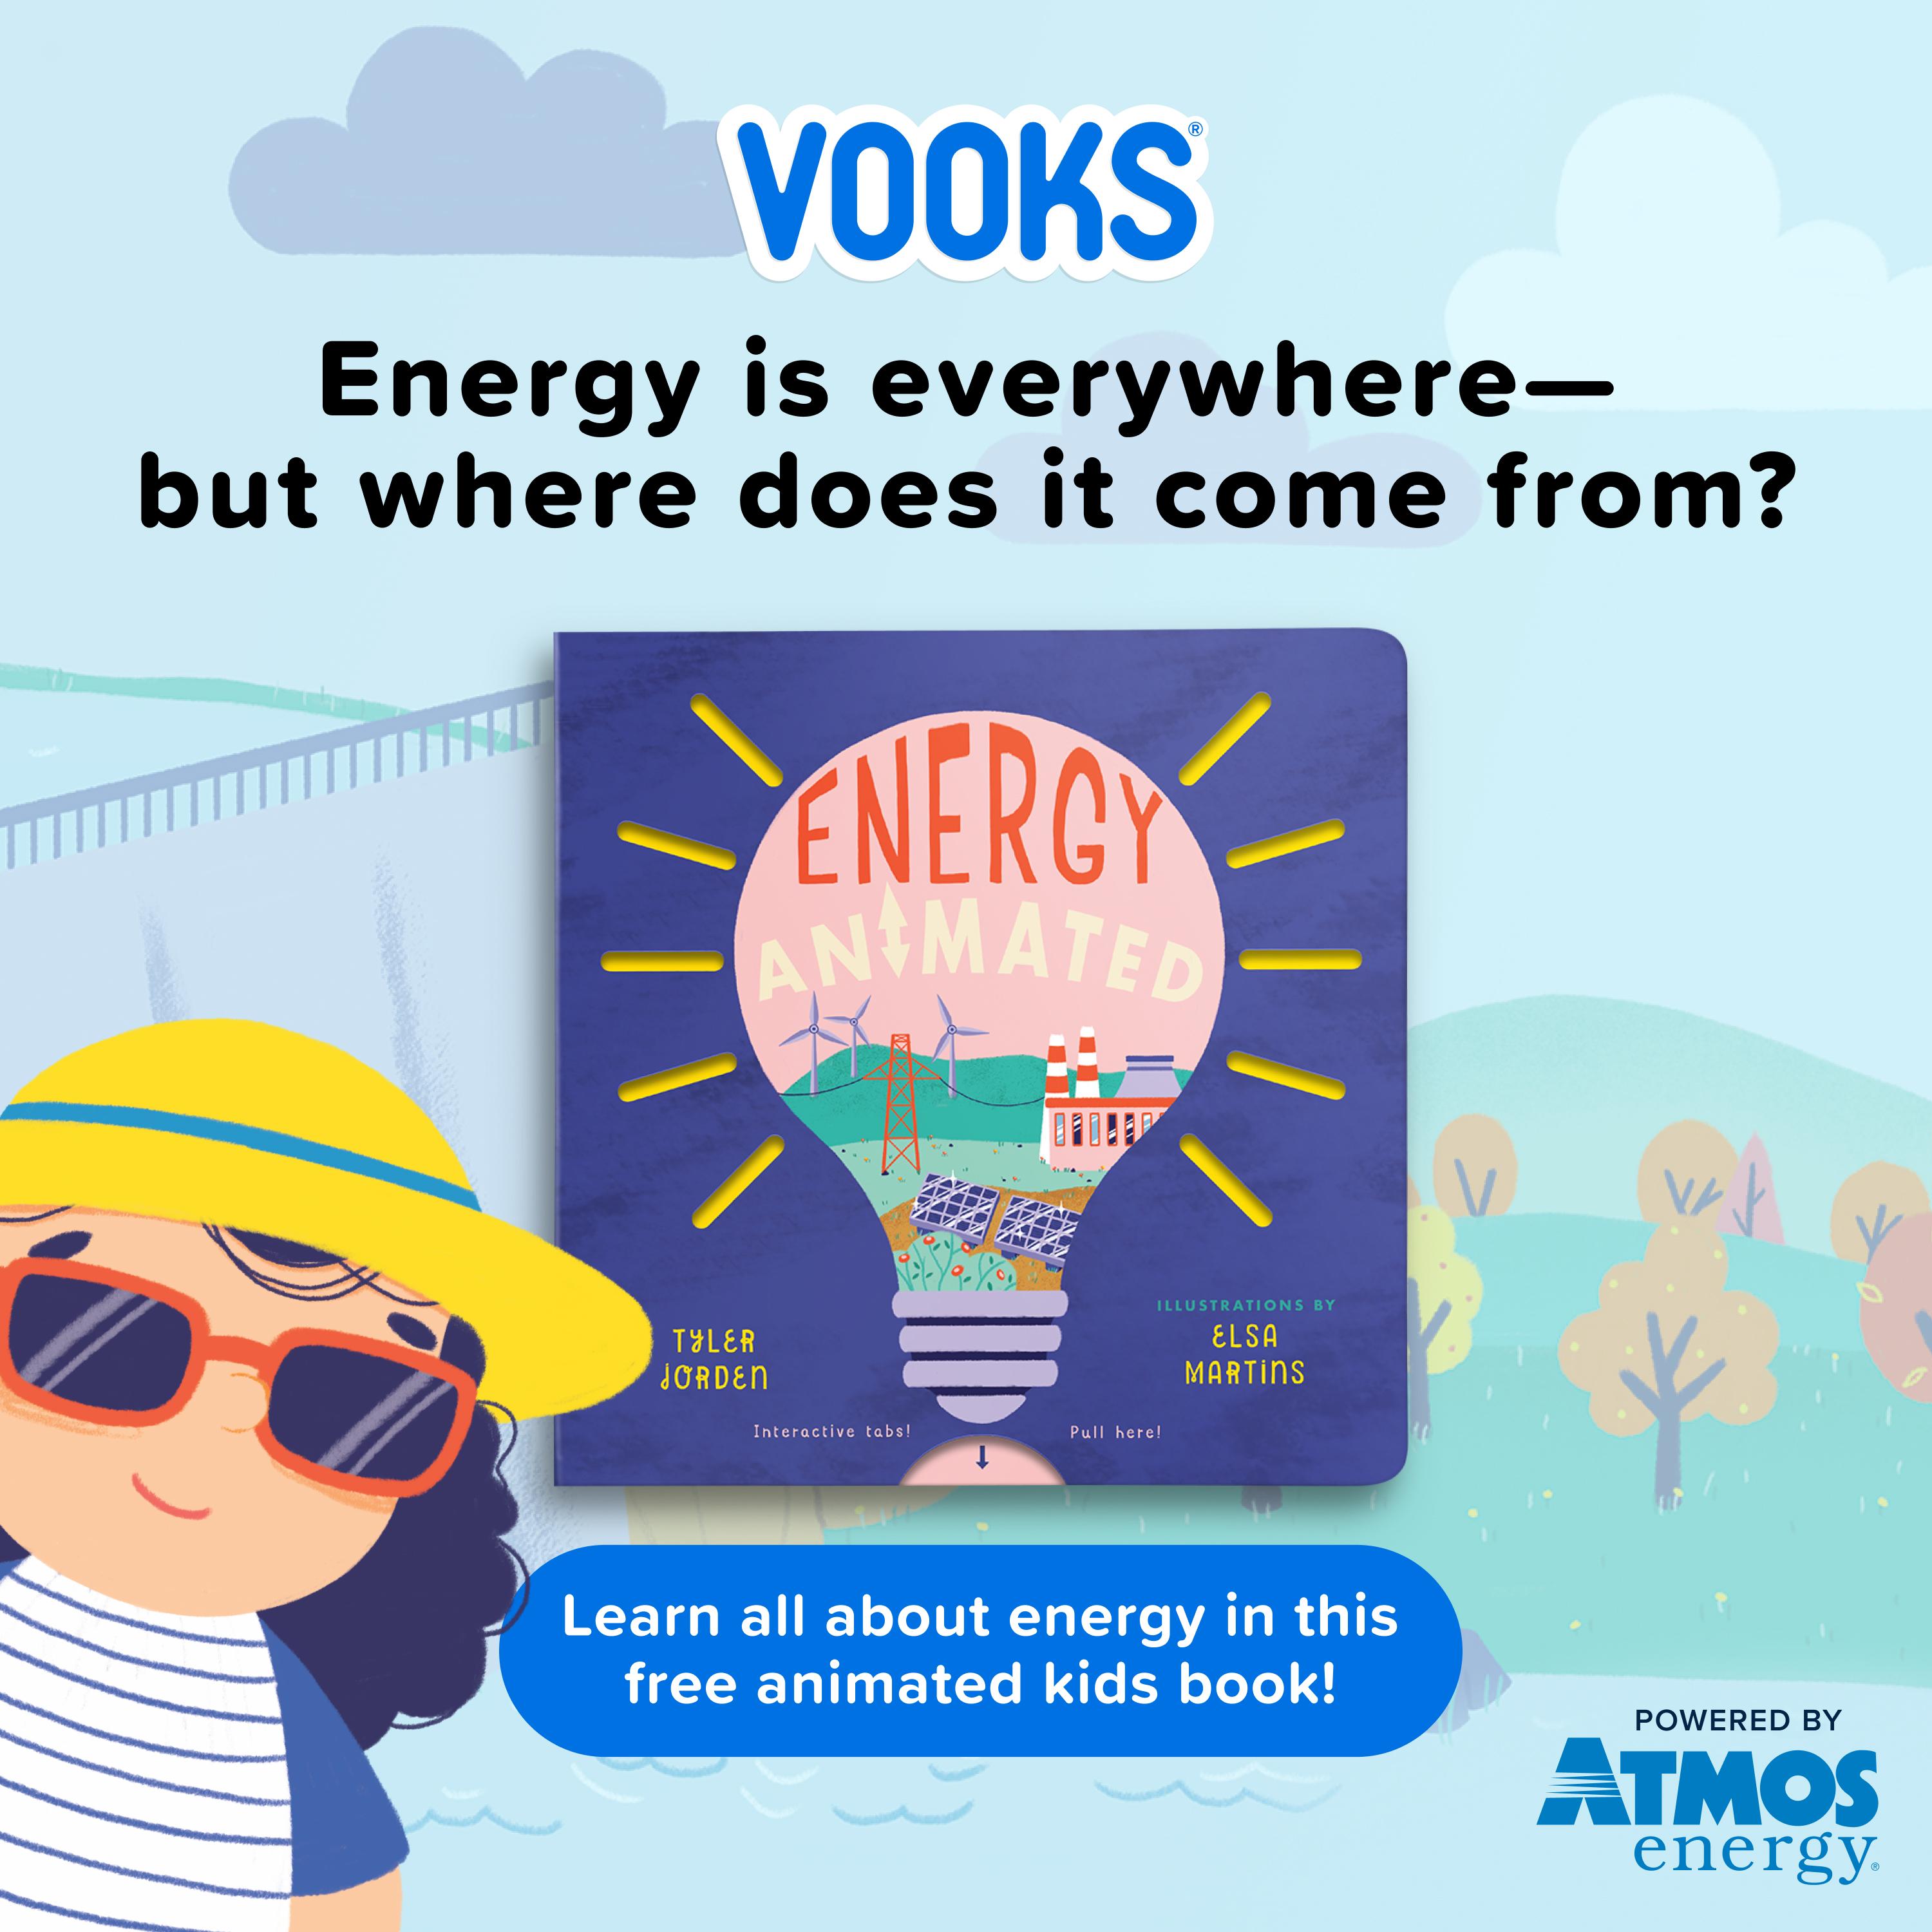 Atmos and Vooks' Social Energy Animated Book